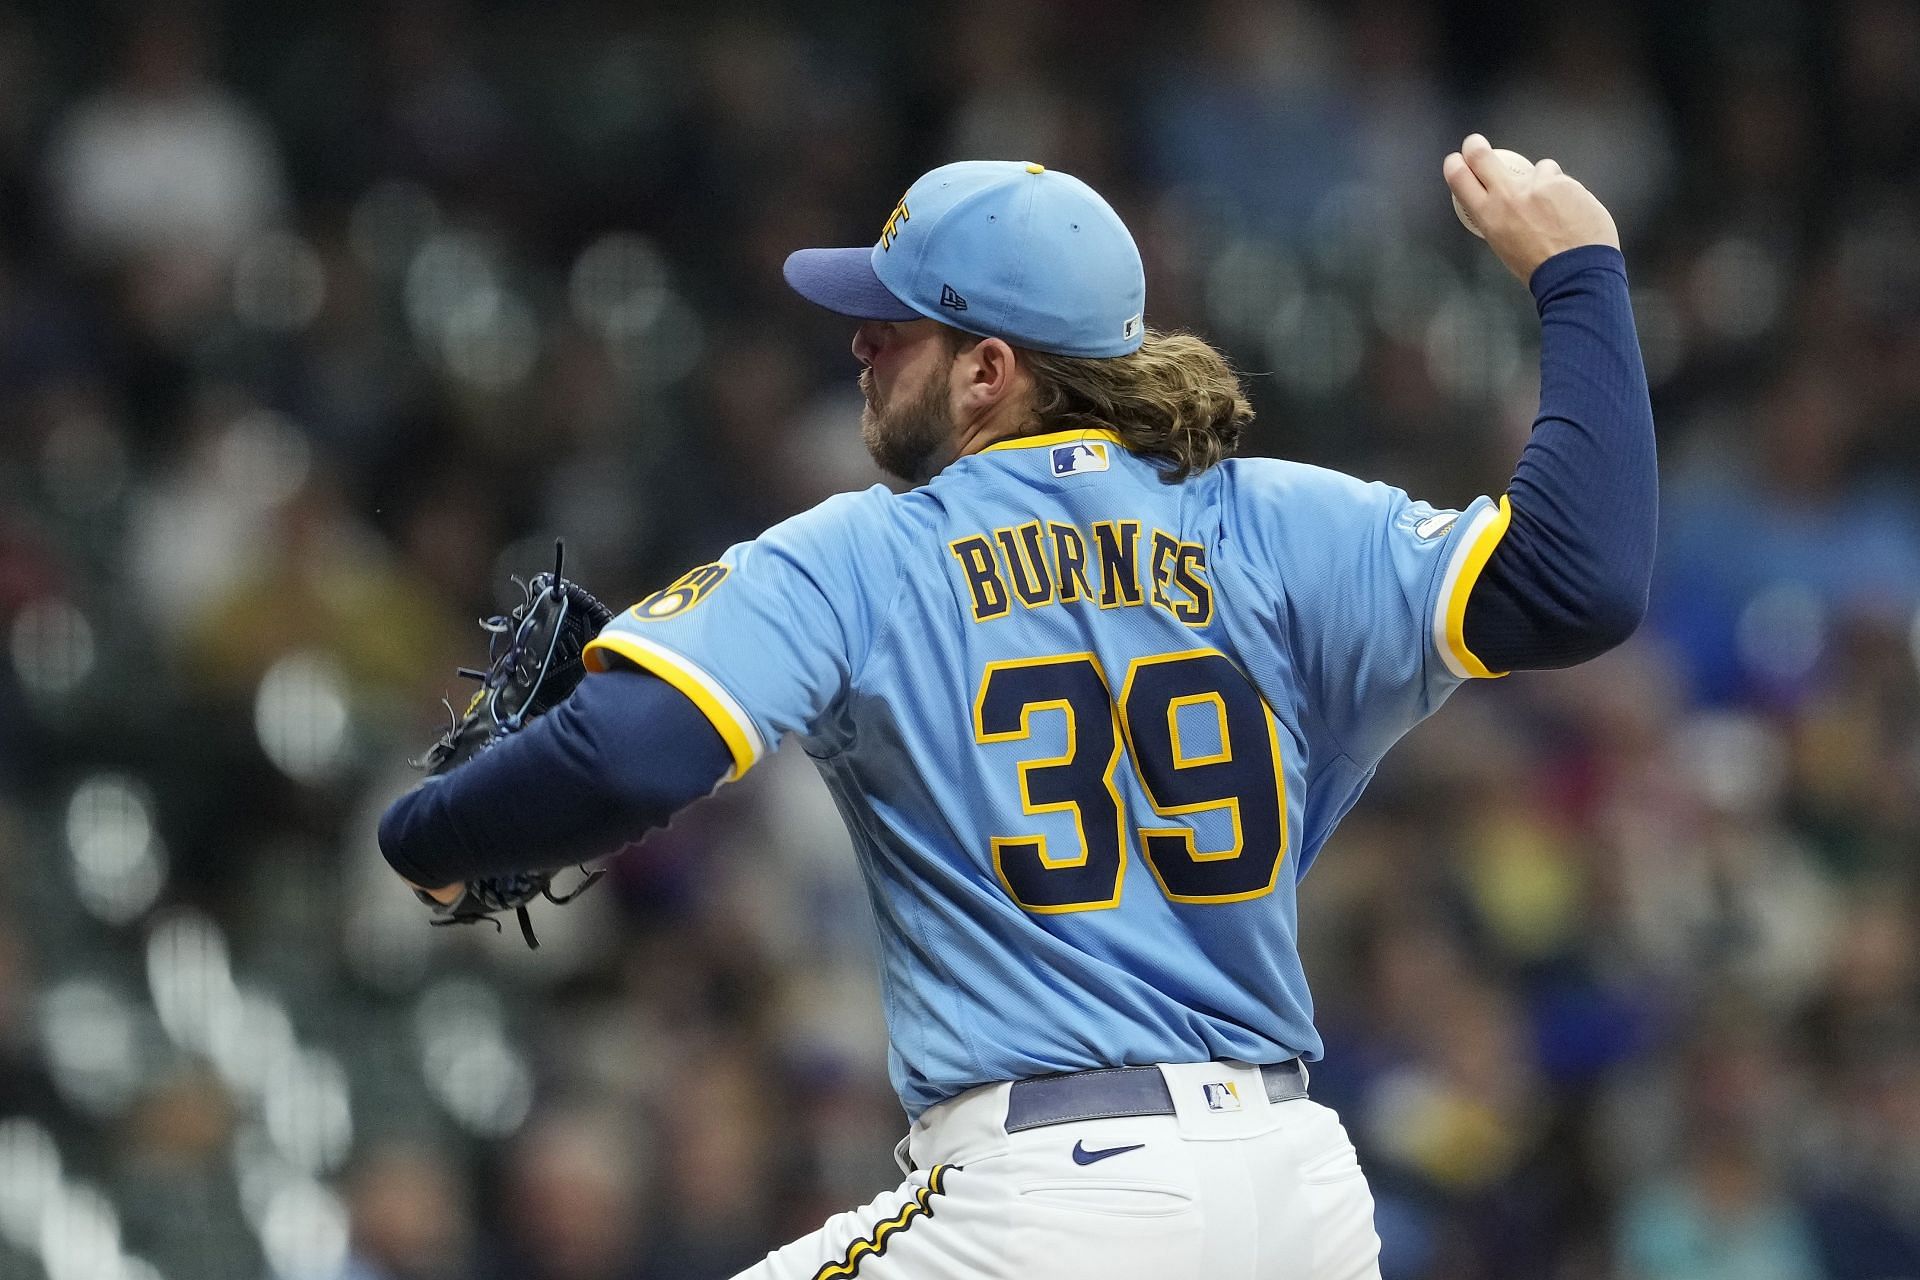 Arrieta battered by Brewers while Burnes dominates